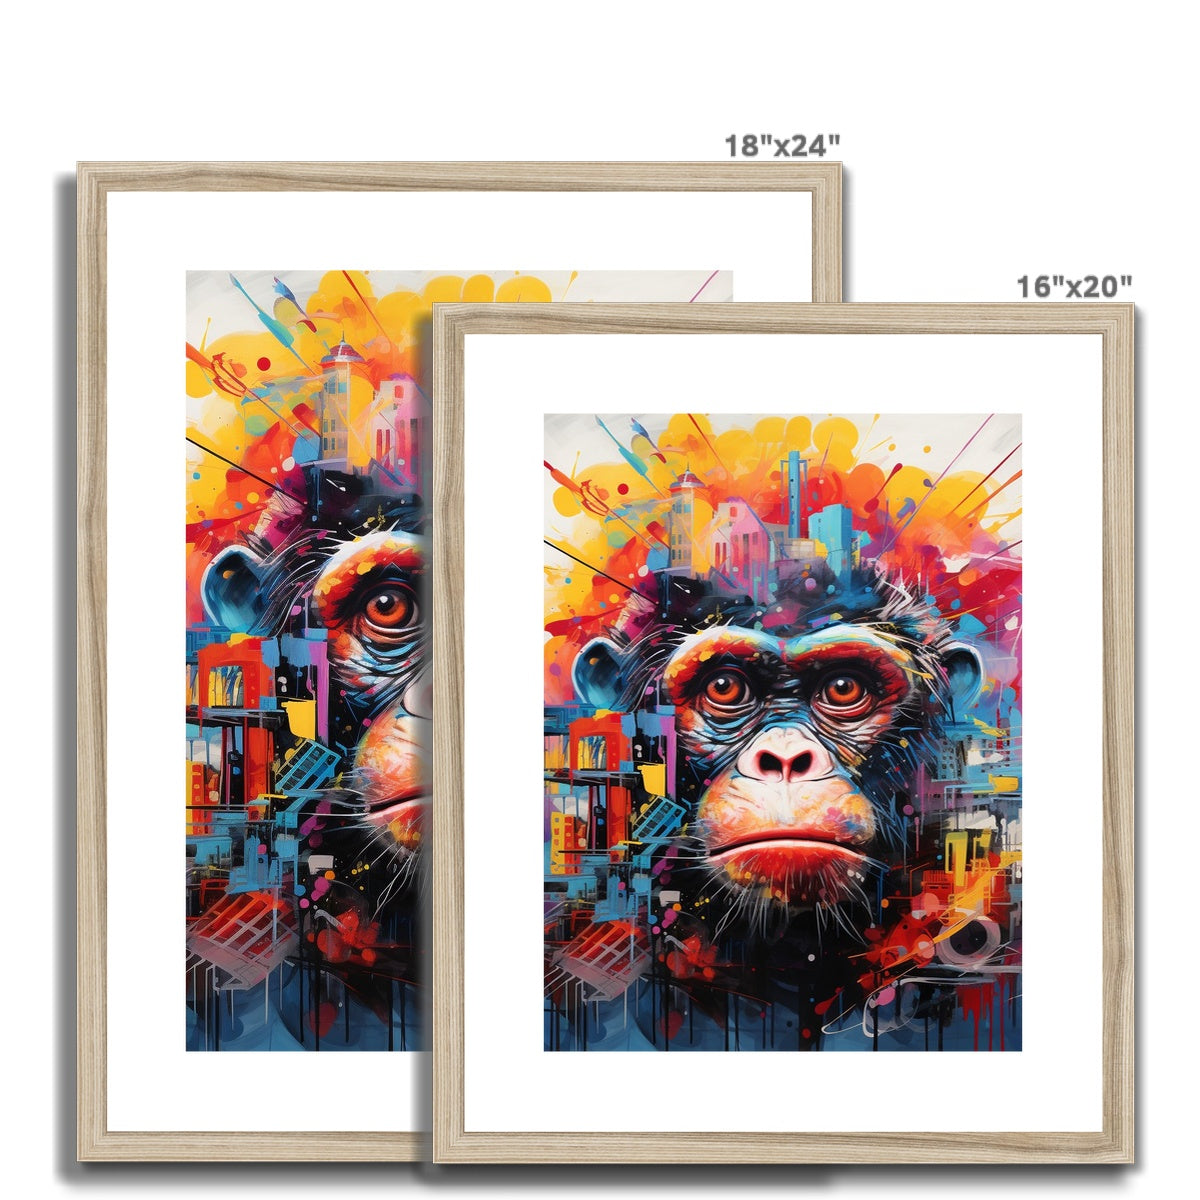 Monkey Business: Limited Edition Framed & Mounted Print